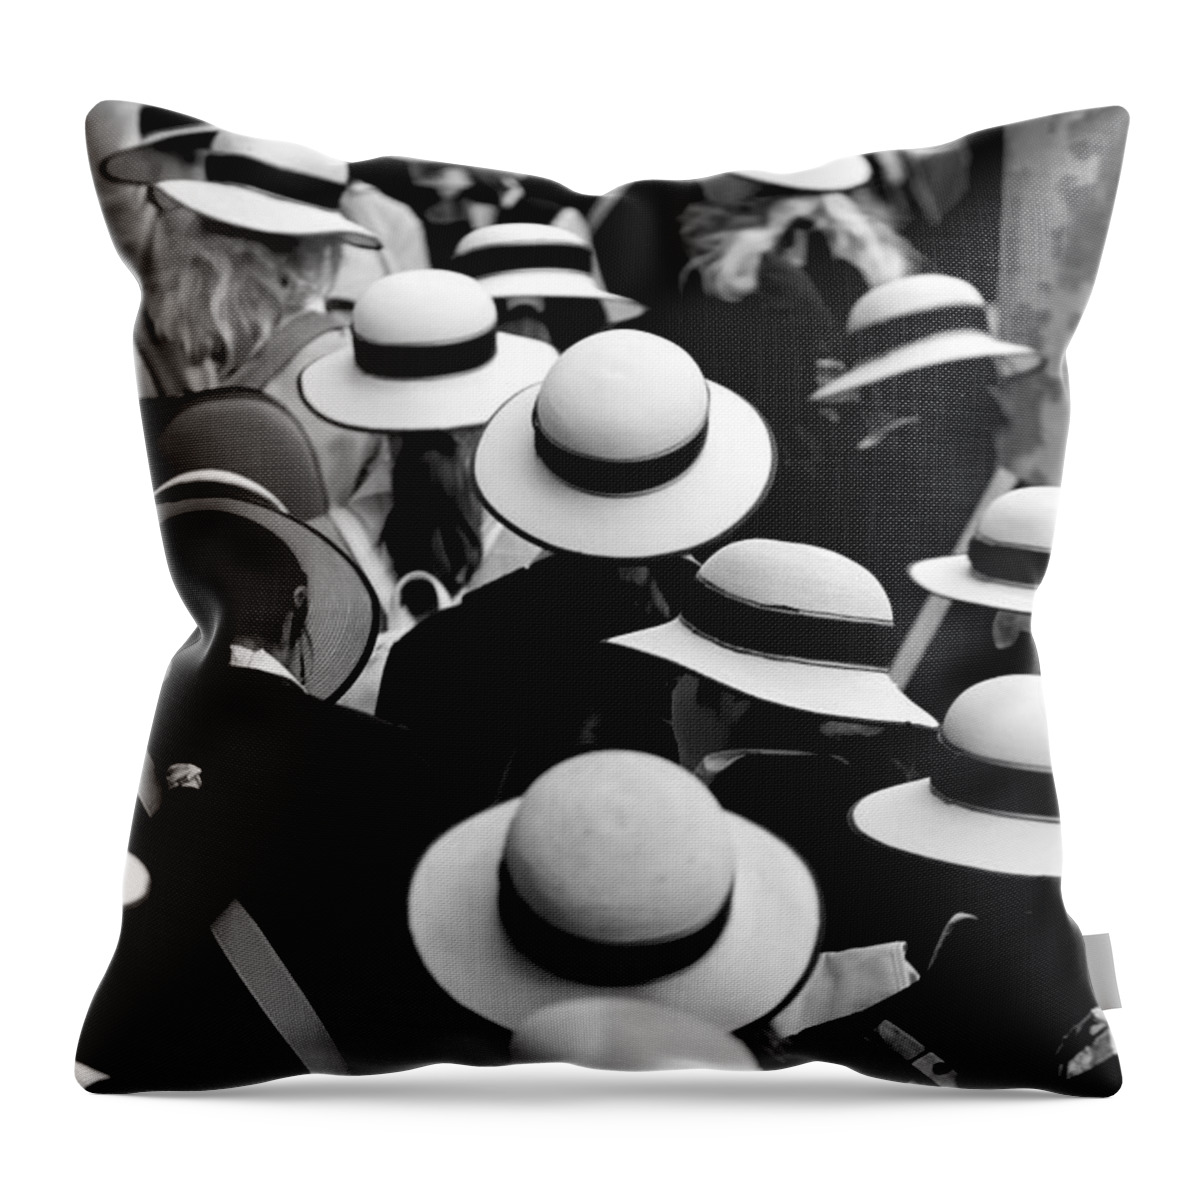 Hats Schoolgirls Sea Of Hats Throw Pillow featuring the photograph Sea of Hats by Sheila Smart Fine Art Photography